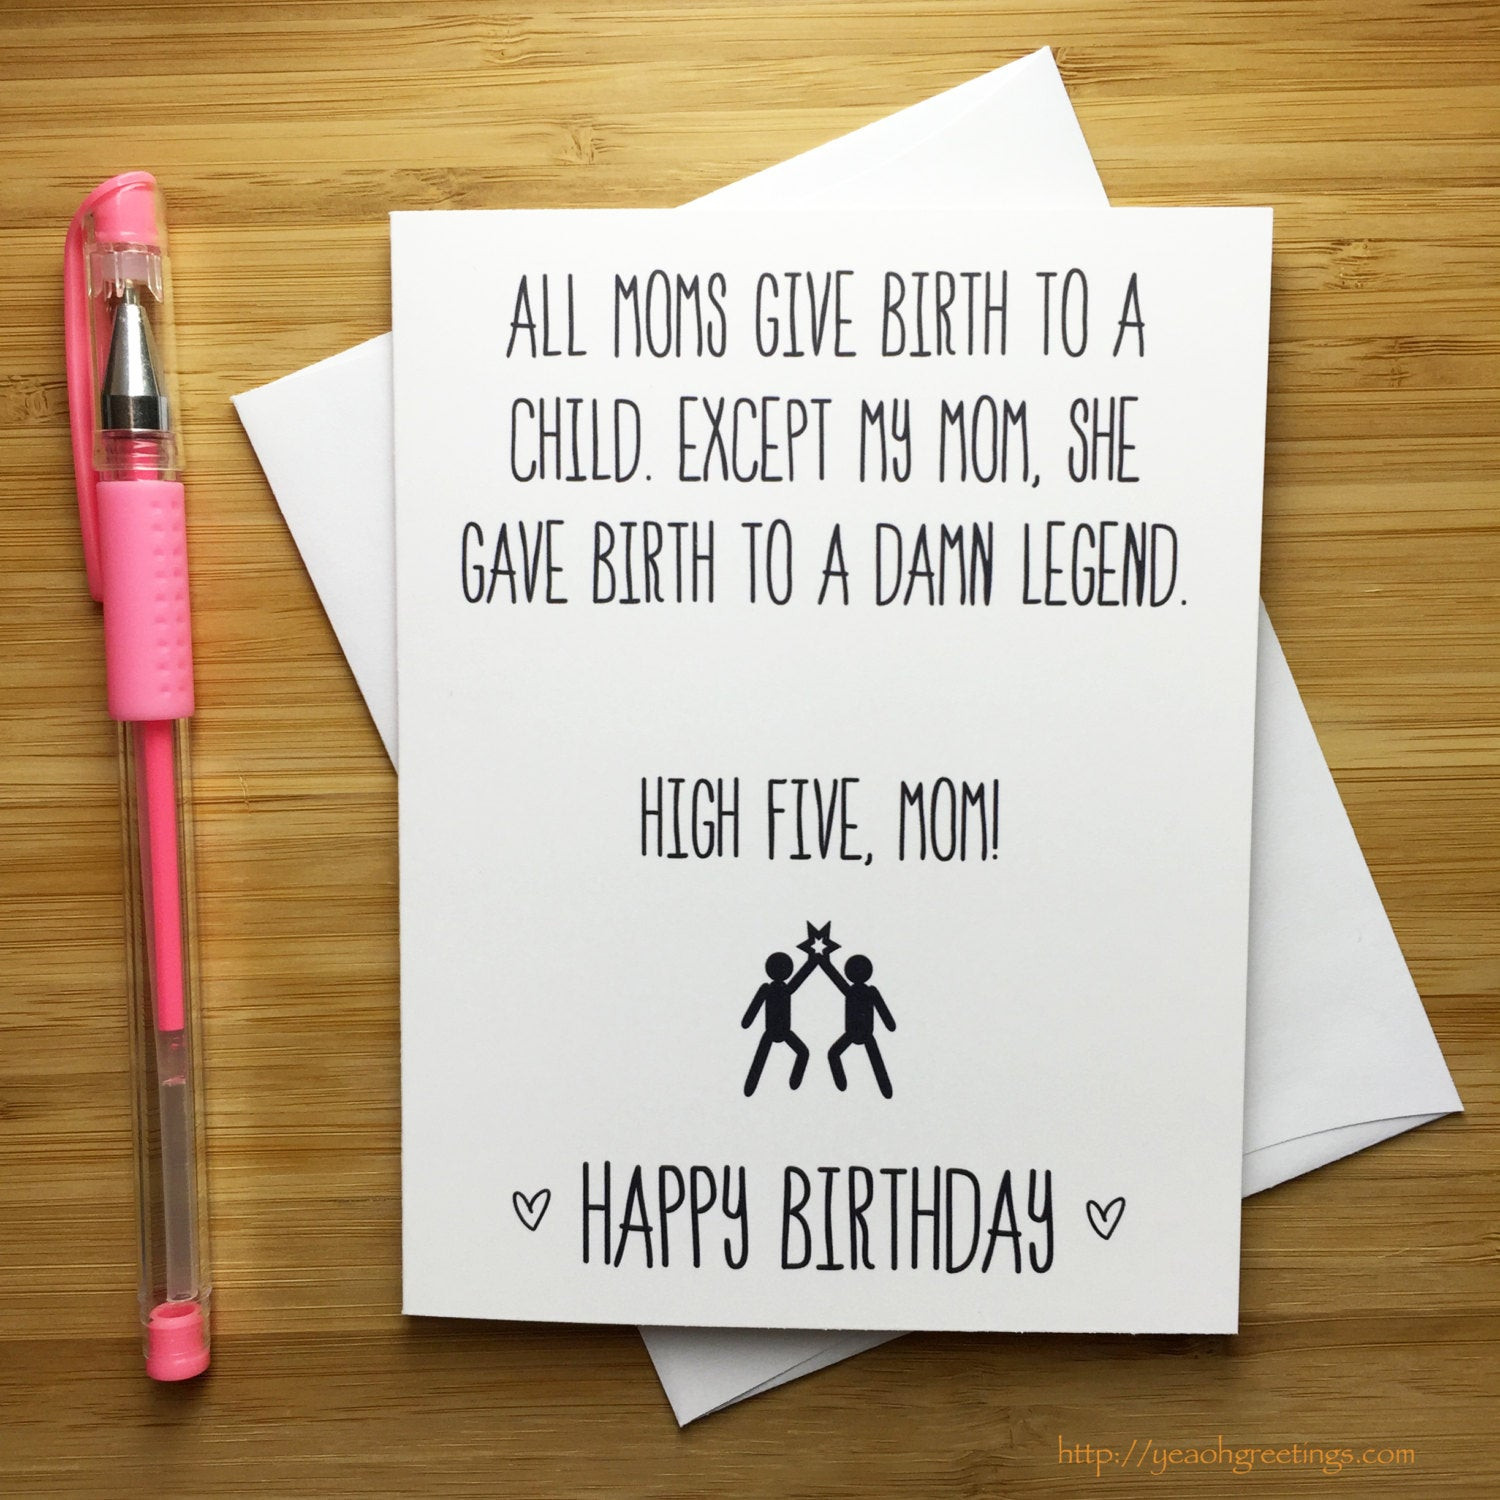 21-ideas-for-funny-birthday-cards-for-mom-from-daughter-home-family-style-and-art-ideas